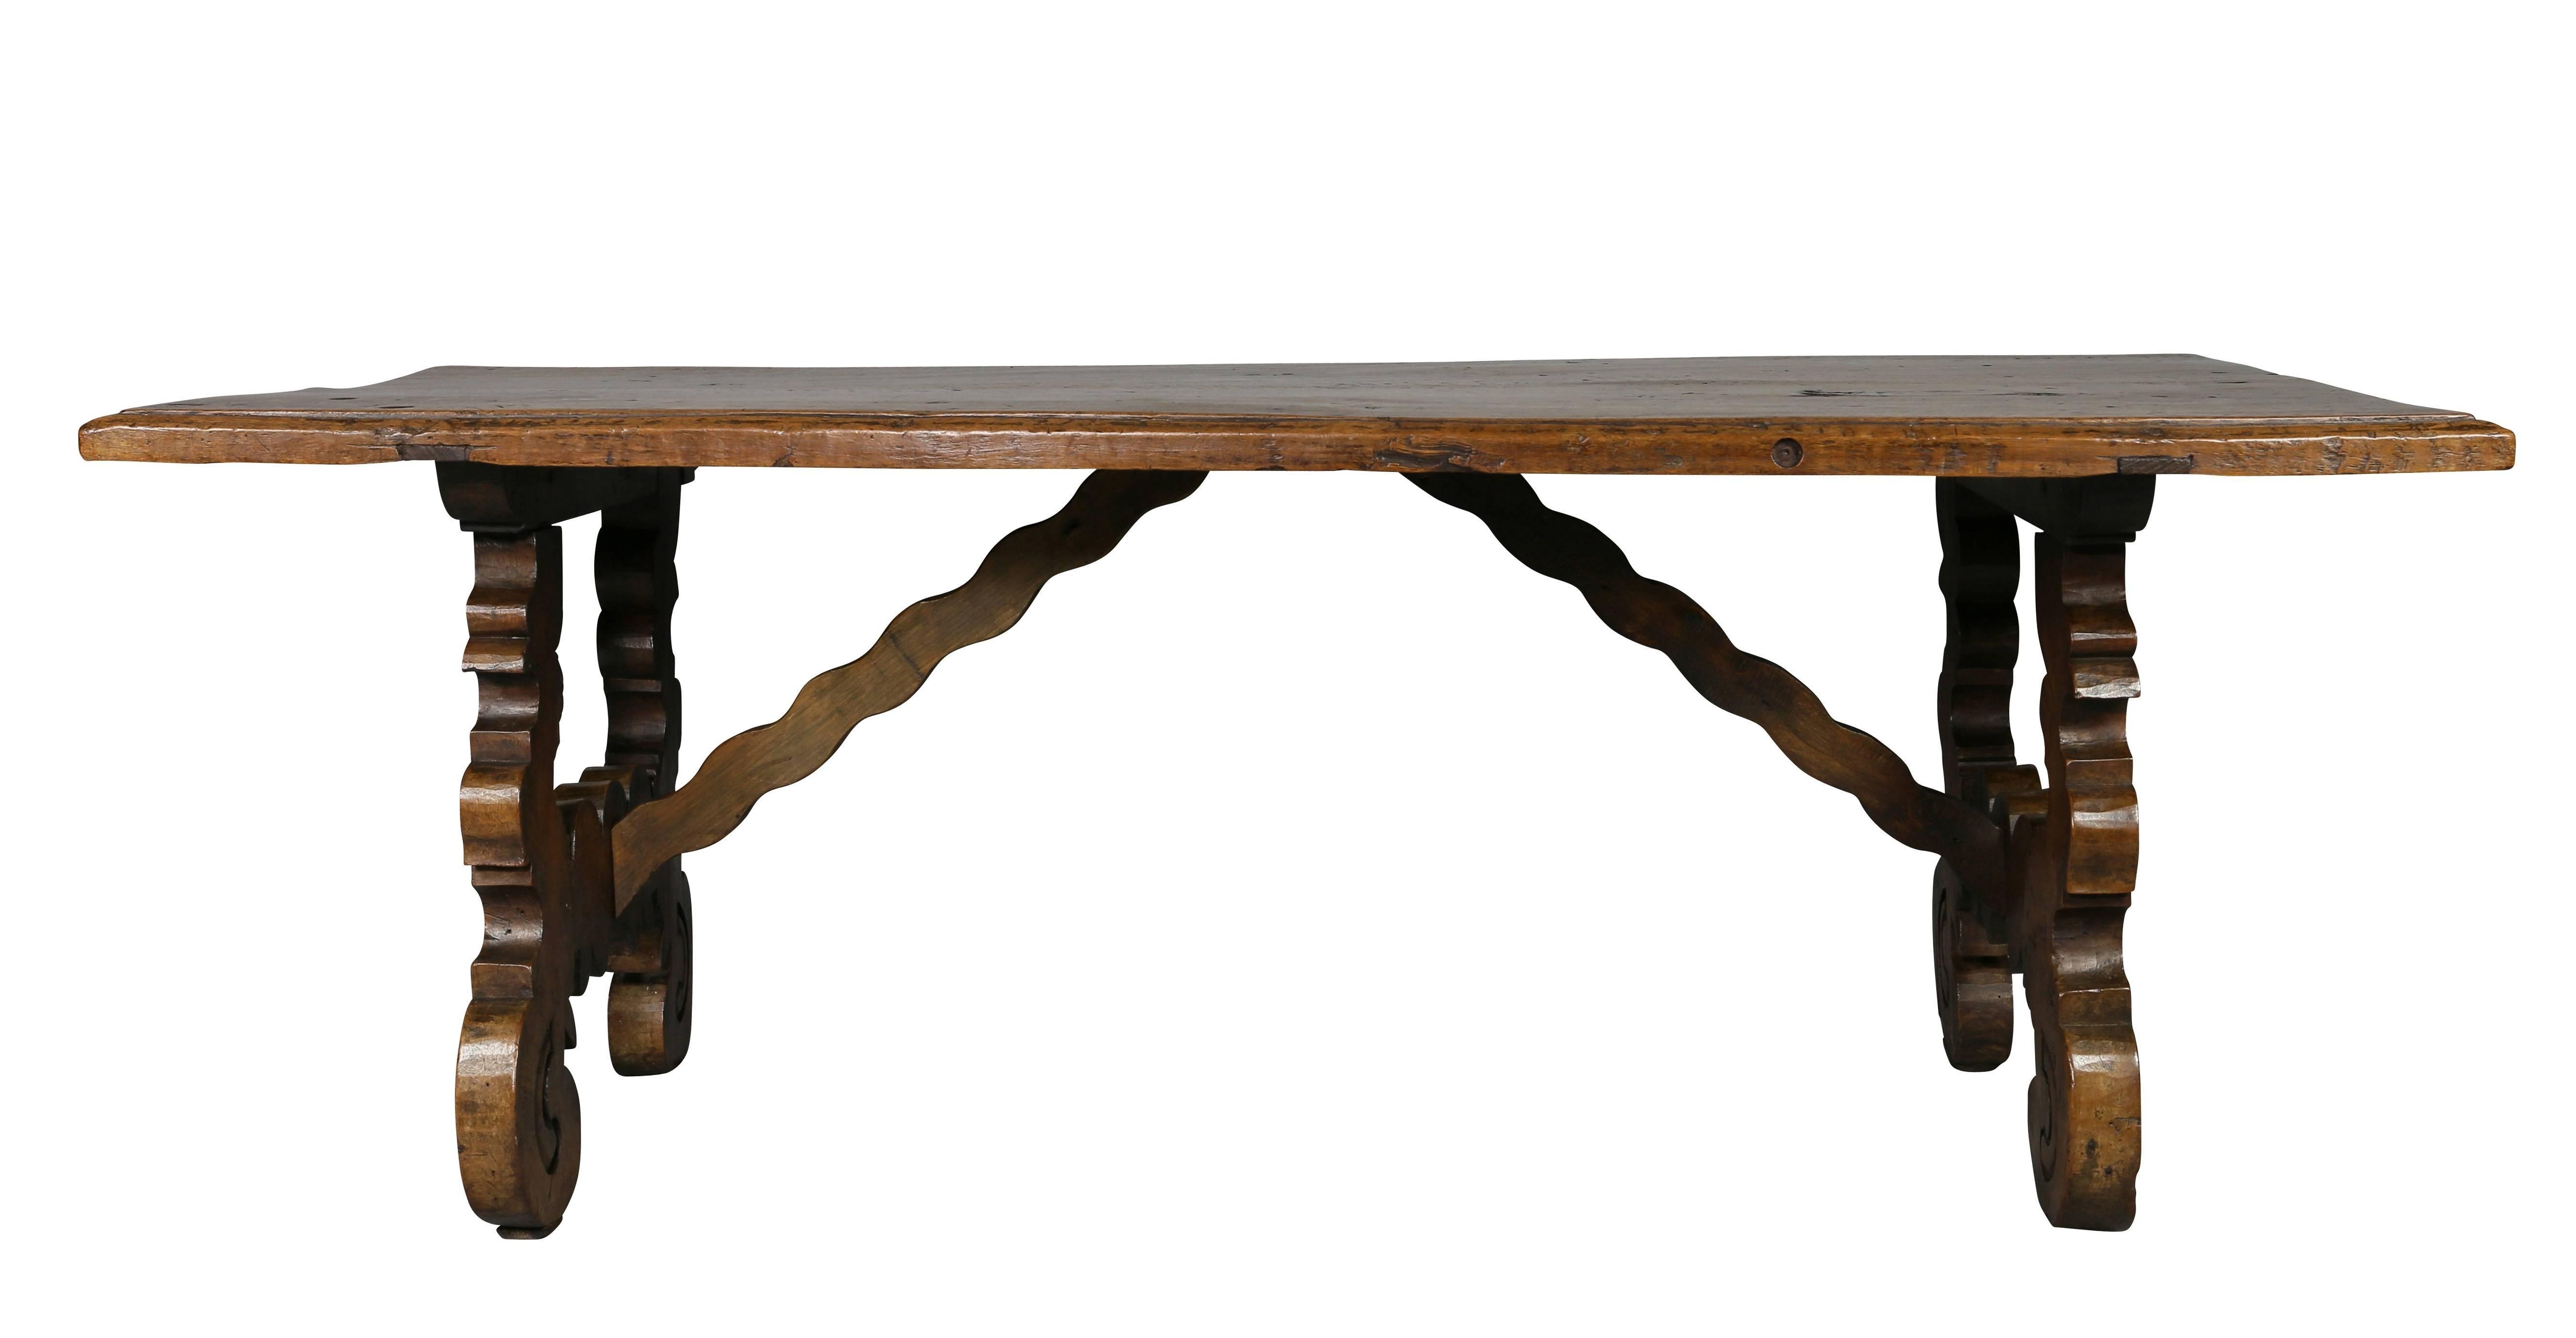 Spanish Colonial Style Walnut Coffee Table For Sale At 1stdibs Intended For Fashionable Spanish Coffee Tables (View 18 of 20)